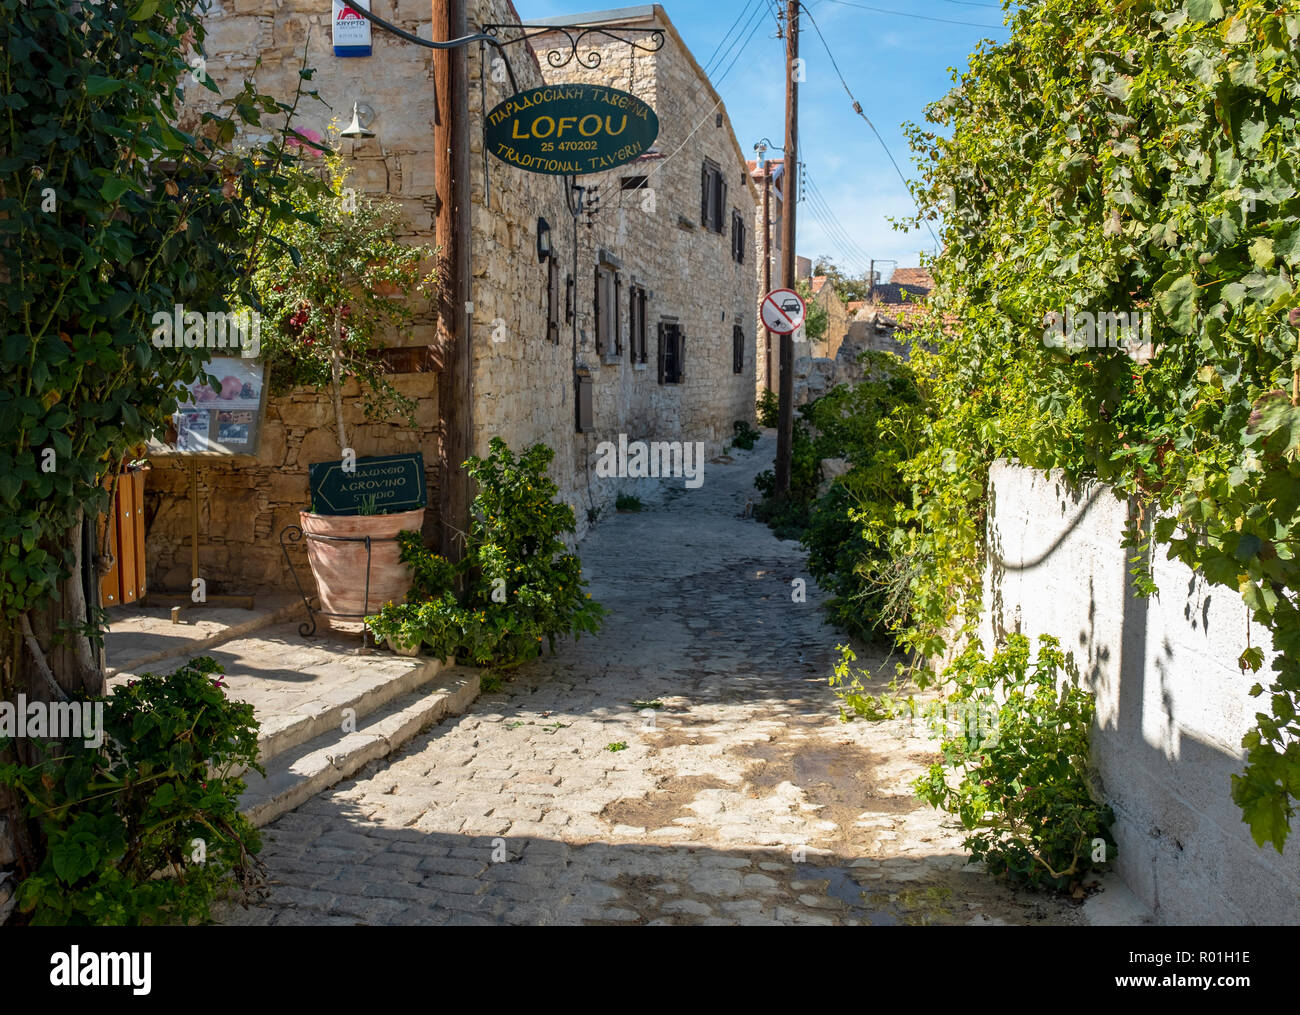 A back street in the village of Lofou, Cyprus. Stock Photo